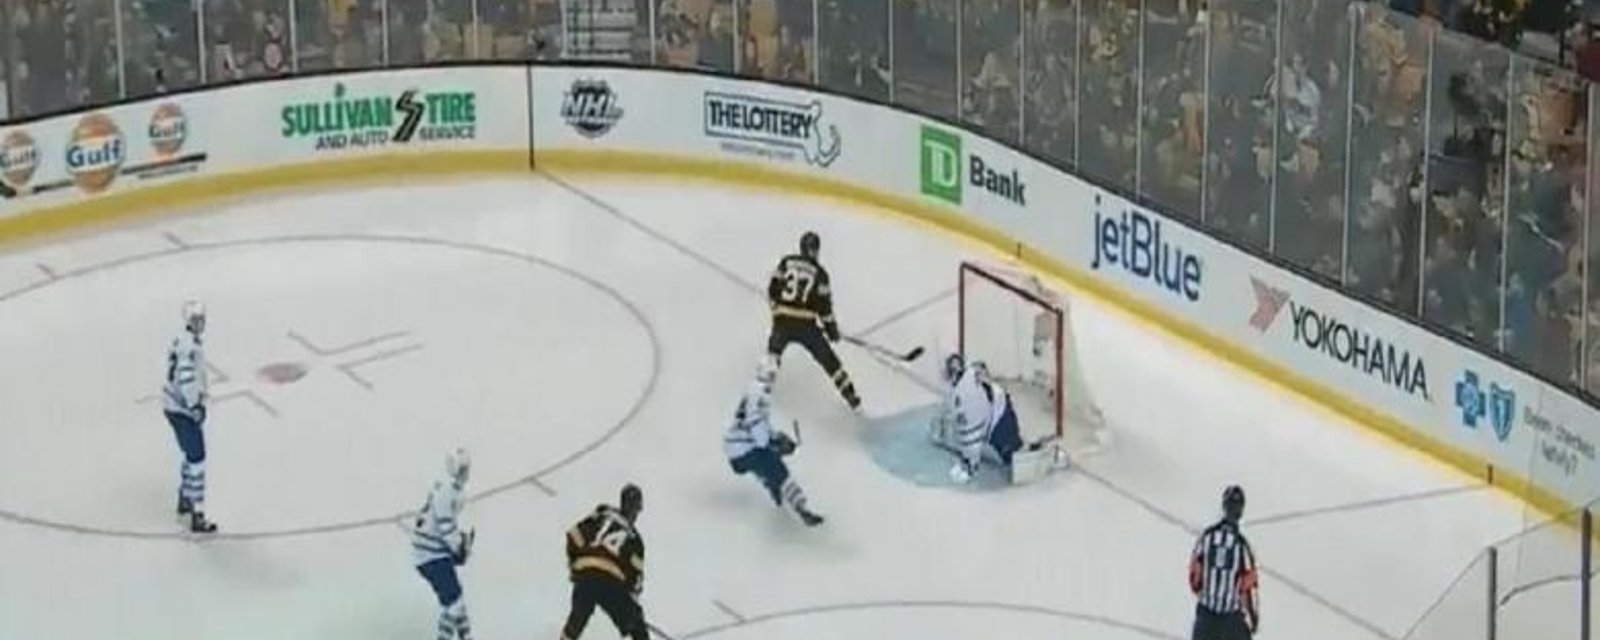 Great stretch pass and dirty finish by Bergeron!